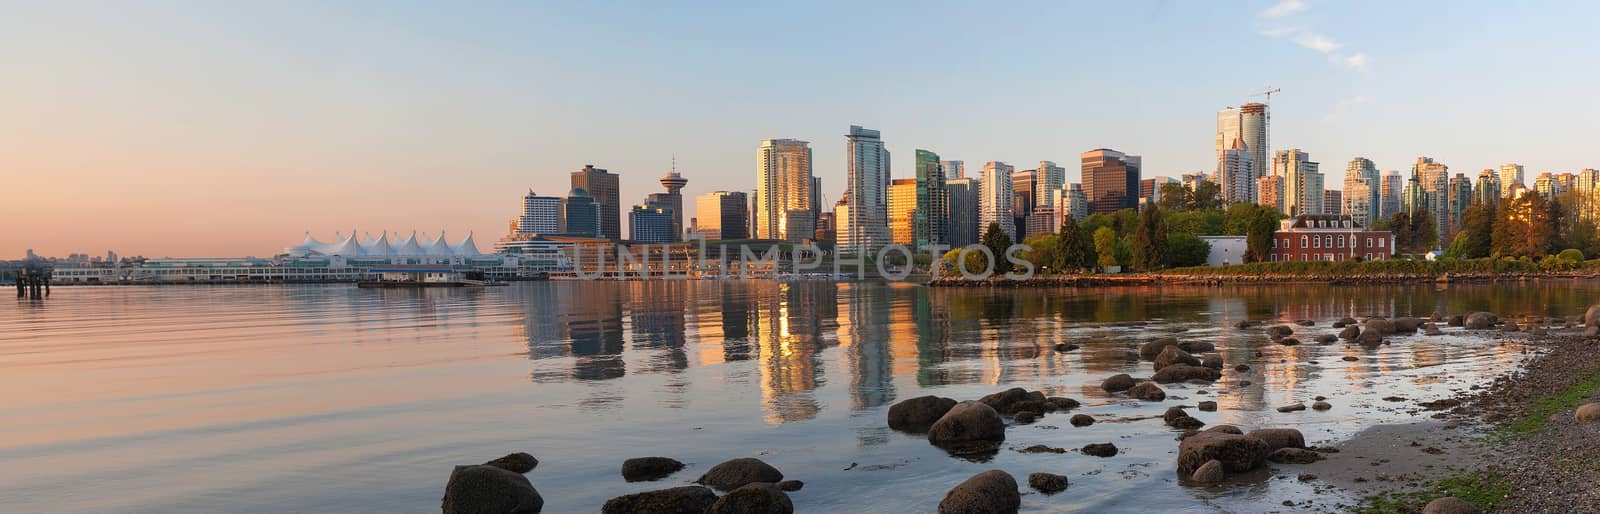 Vancouver BC Skyline from Stanley Park at Sunrise Panorama by jpldesigns